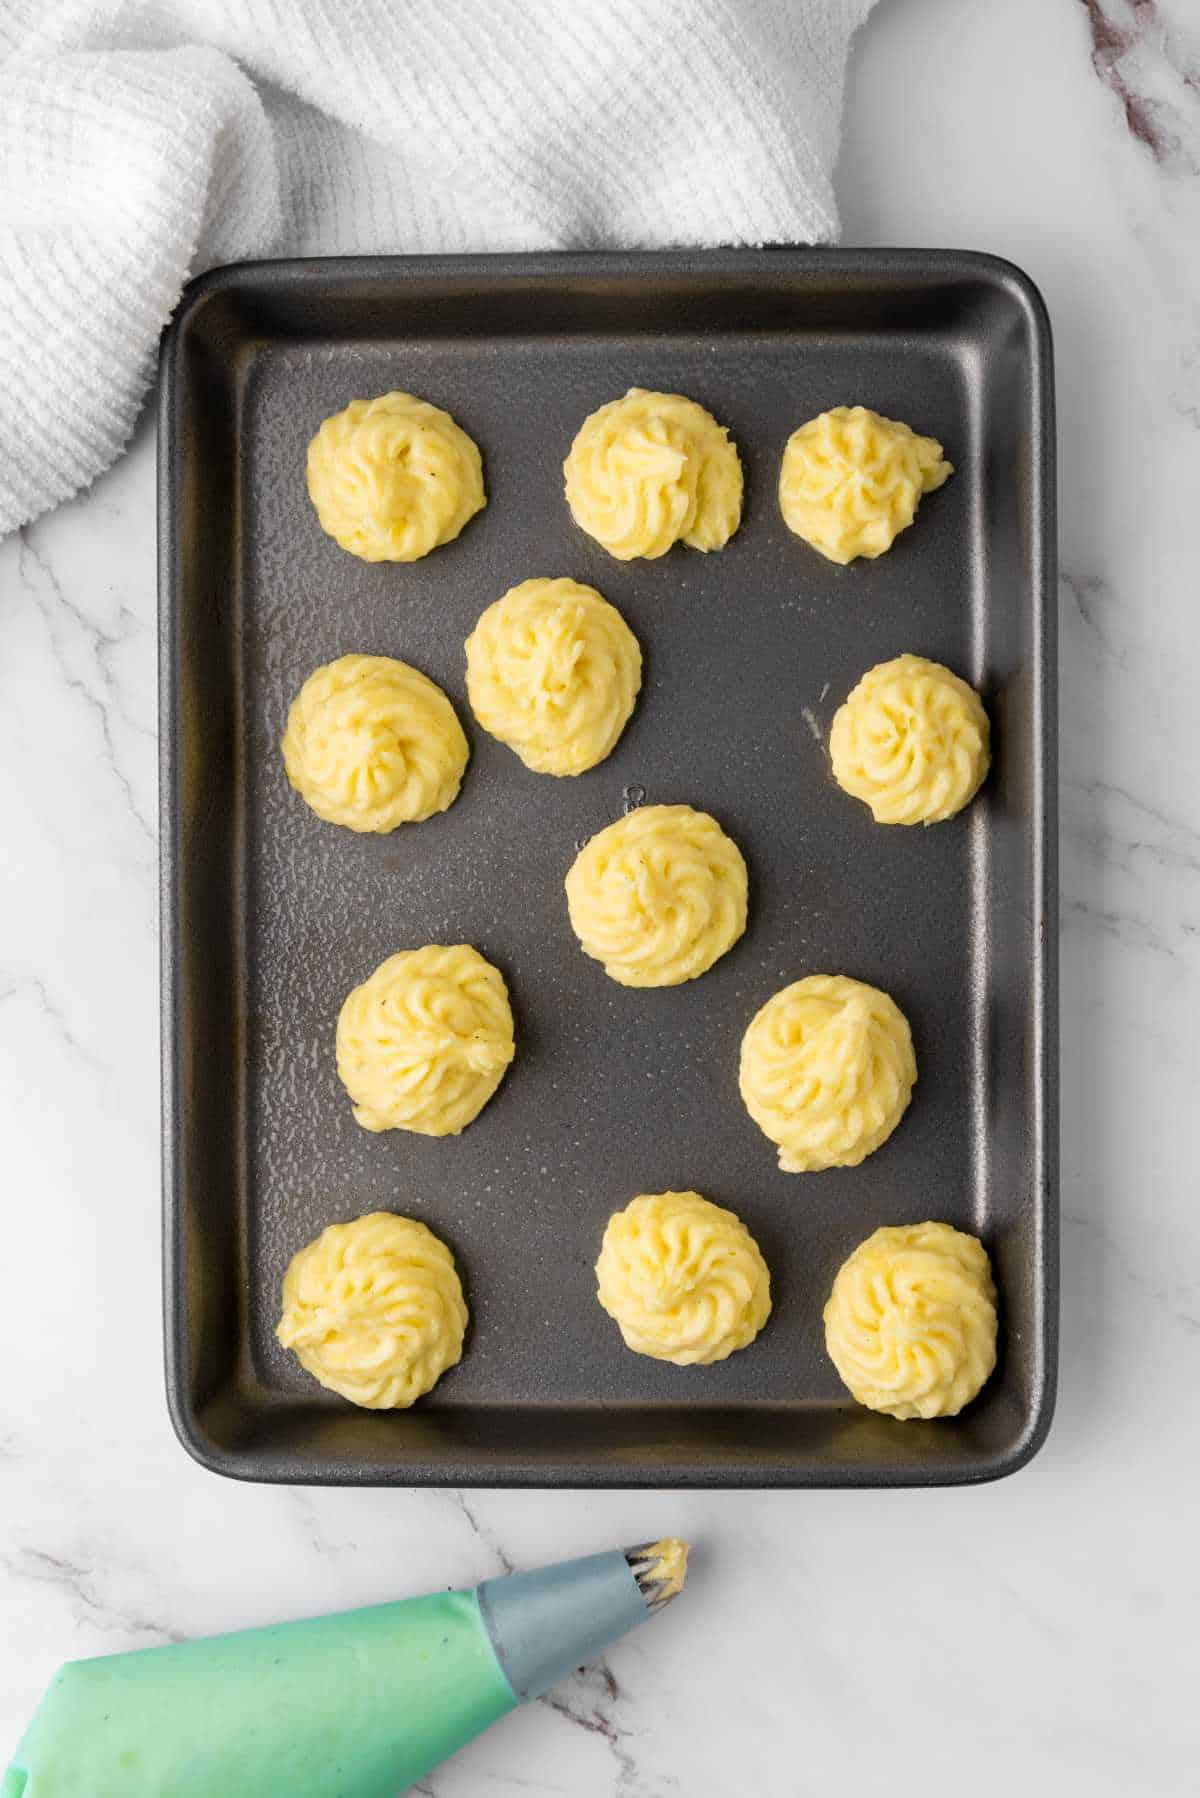 piped potato puffs on a tray for baking.